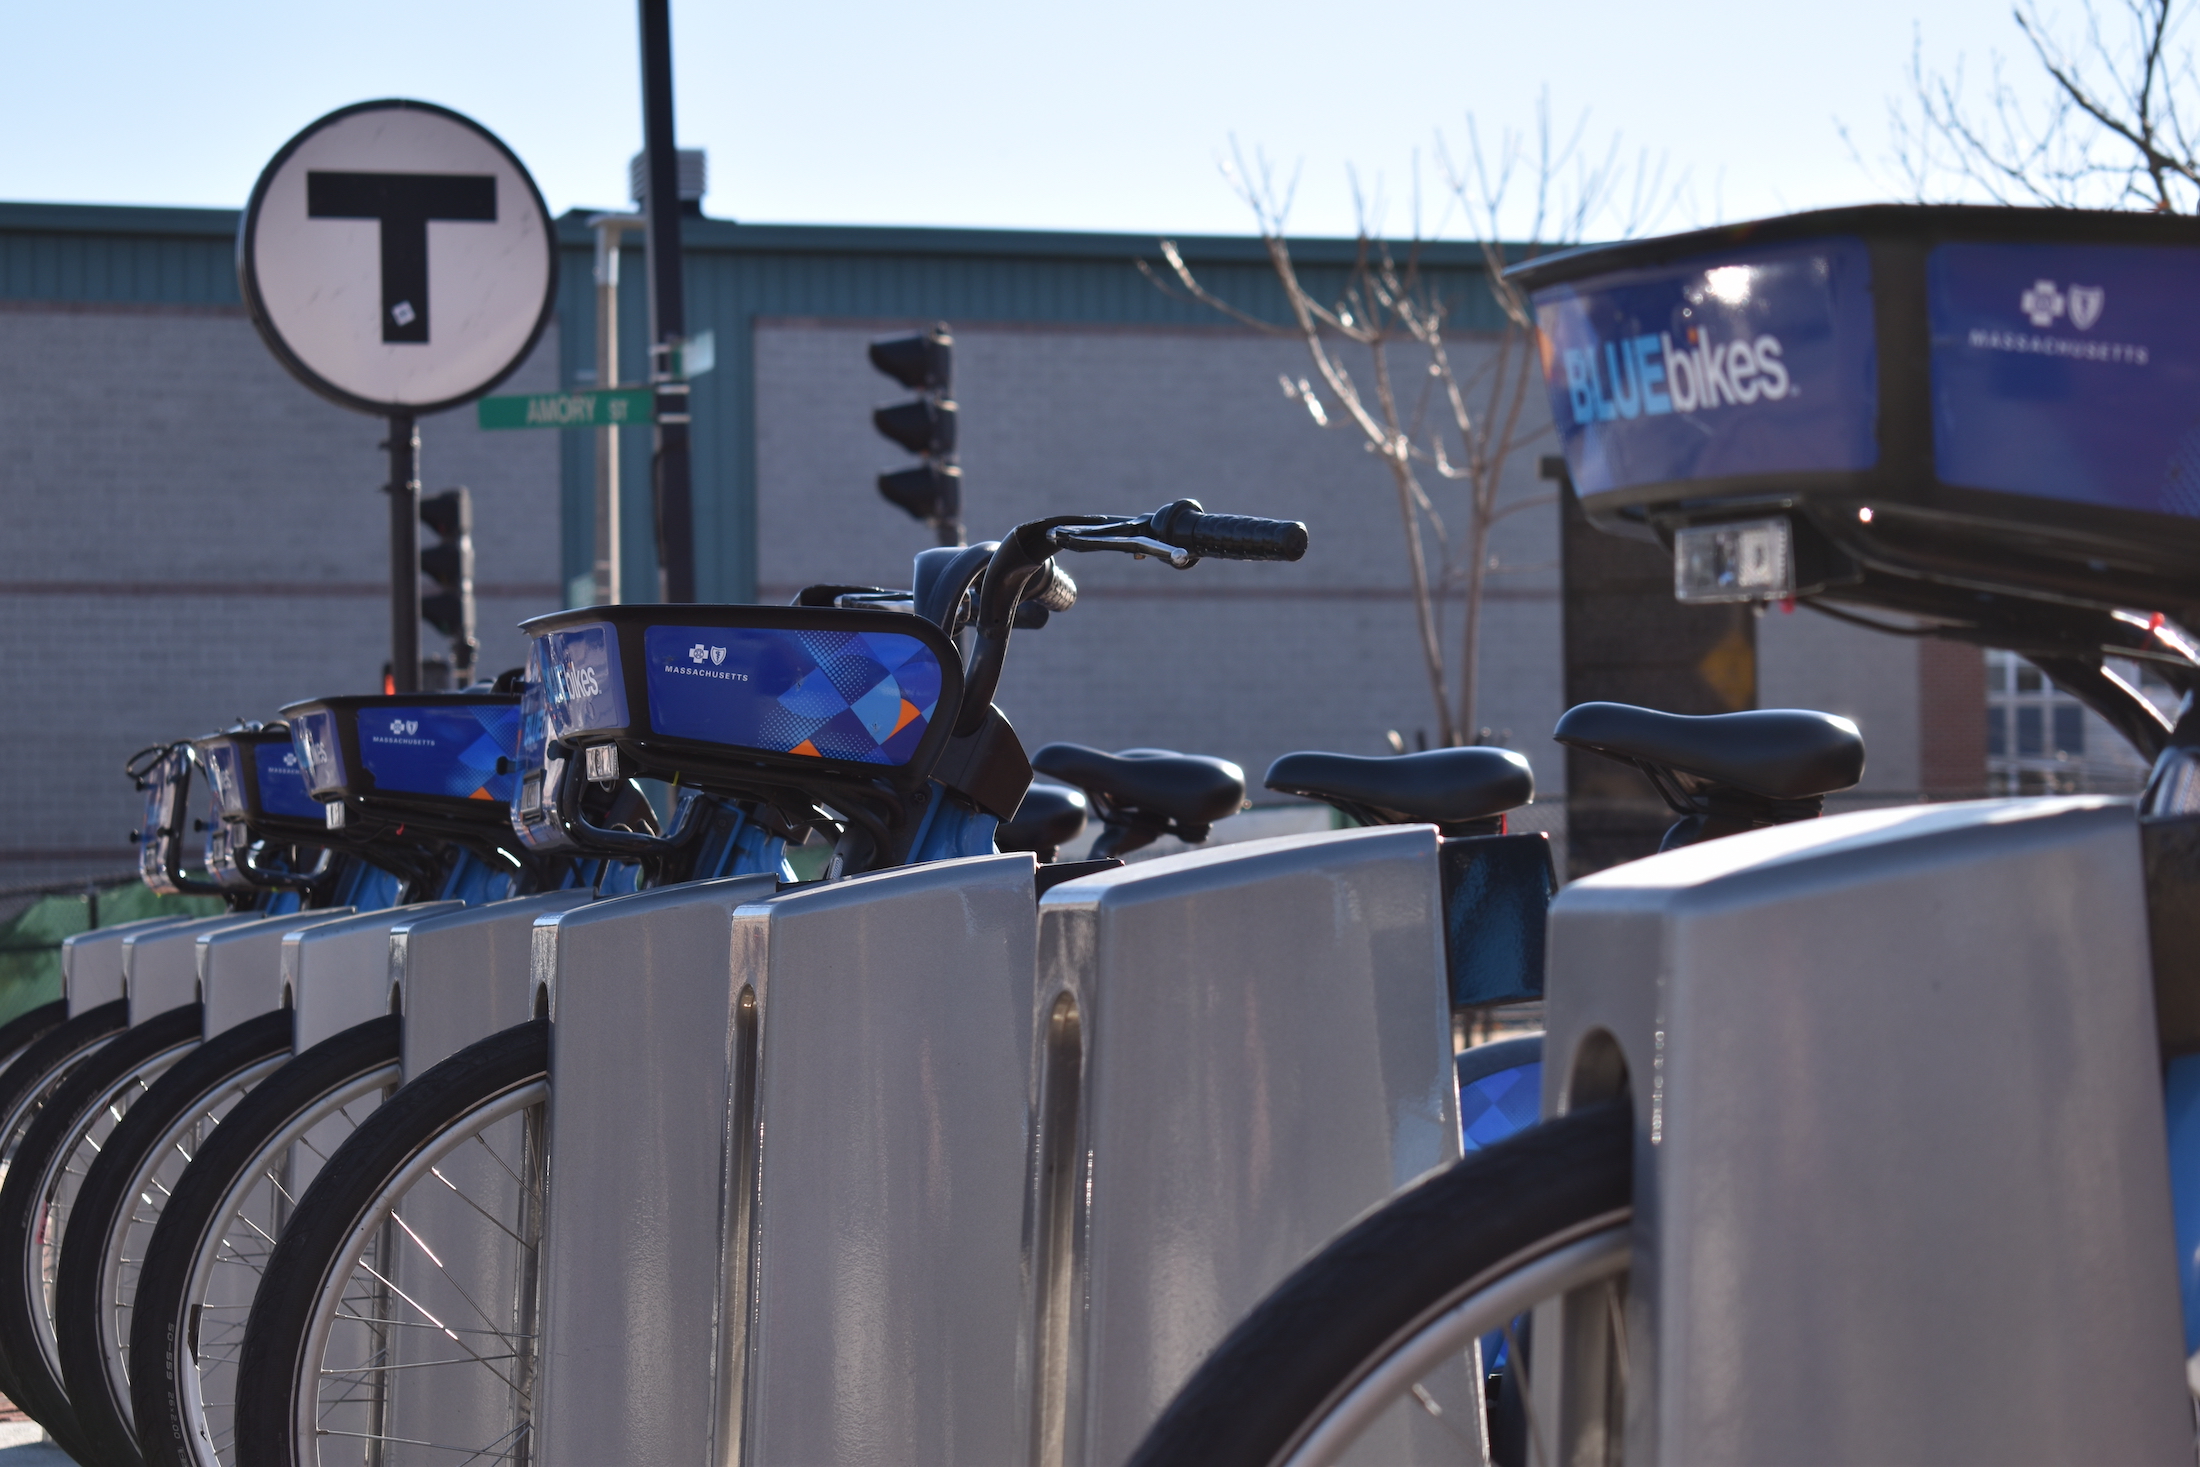 A Bluebikes dock at the Green Street Orange Line station in Jamaica Plain.